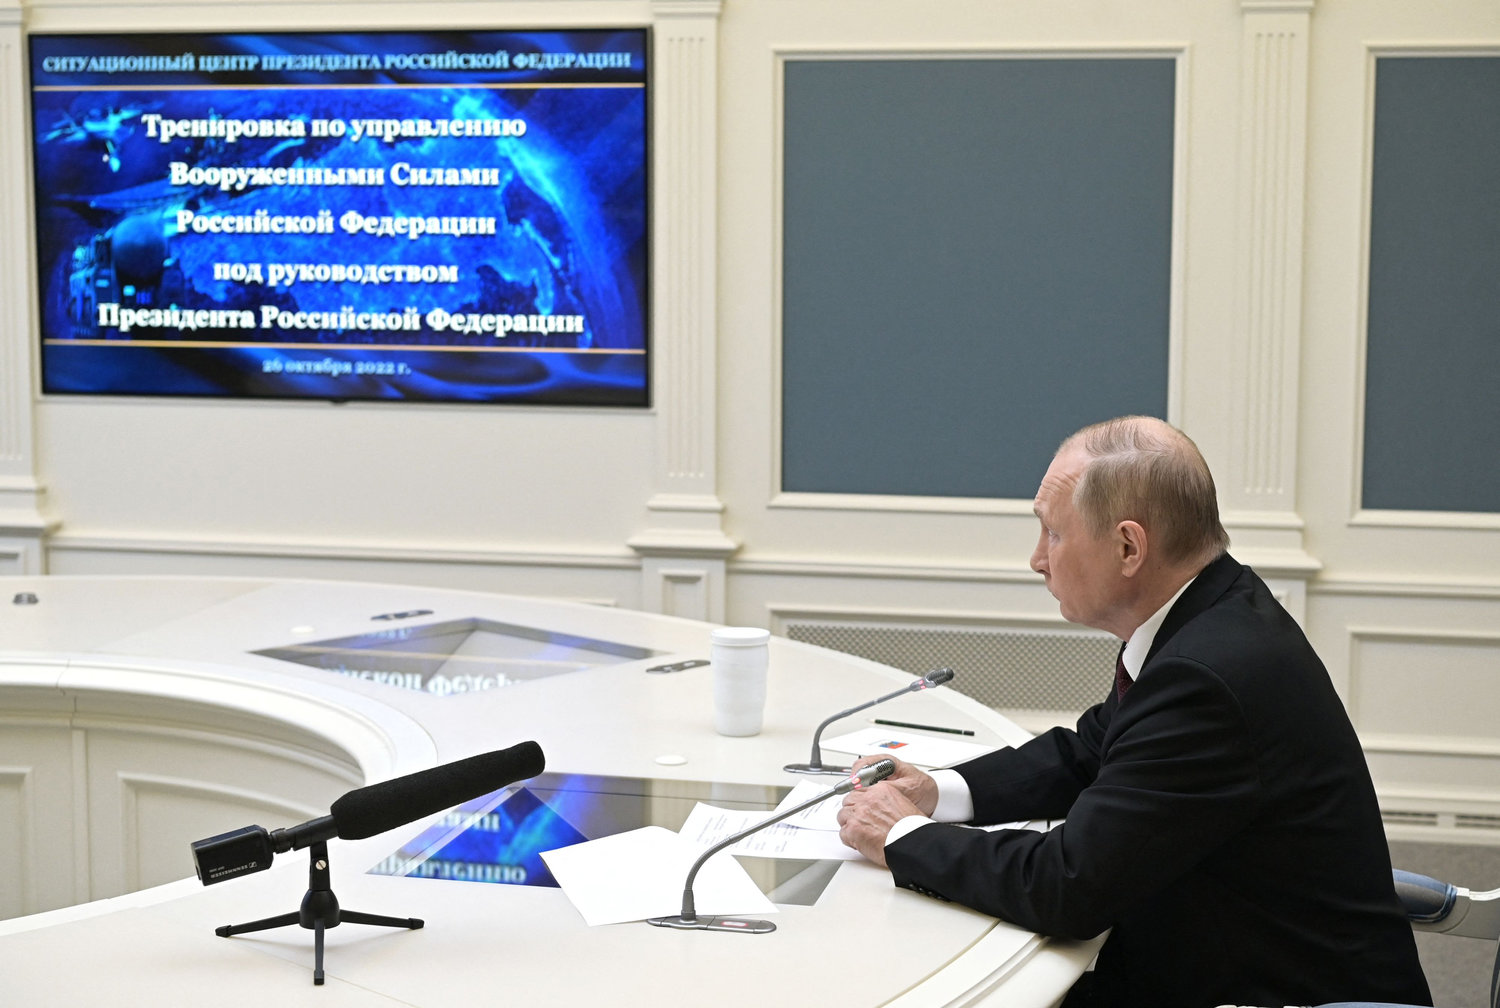 Russian President Vladimir Putin oversees the training of the strategic deterrence forces, troops responsible for responding to threats of nuclear war, via a video link in Moscow on October 26, 2022. (Alexei Babushkin/SPUTNIK/AFP via Getty Images/TNS)